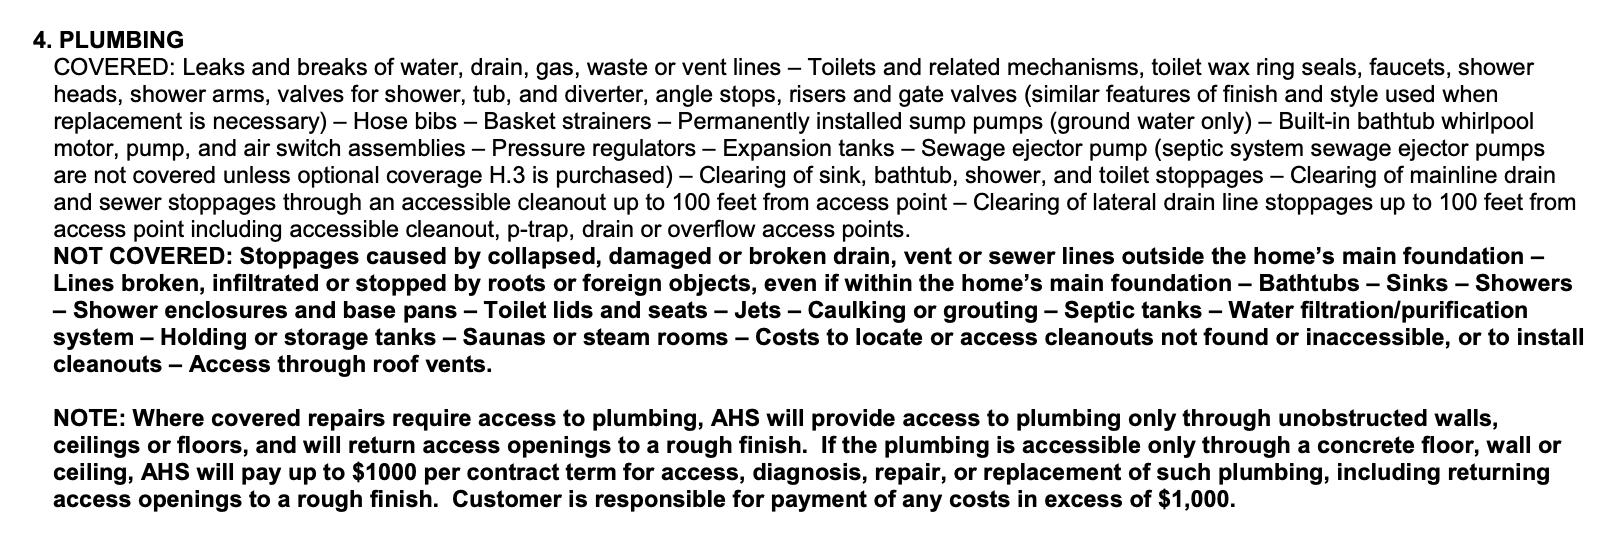 Plumbing issues covered by AHS